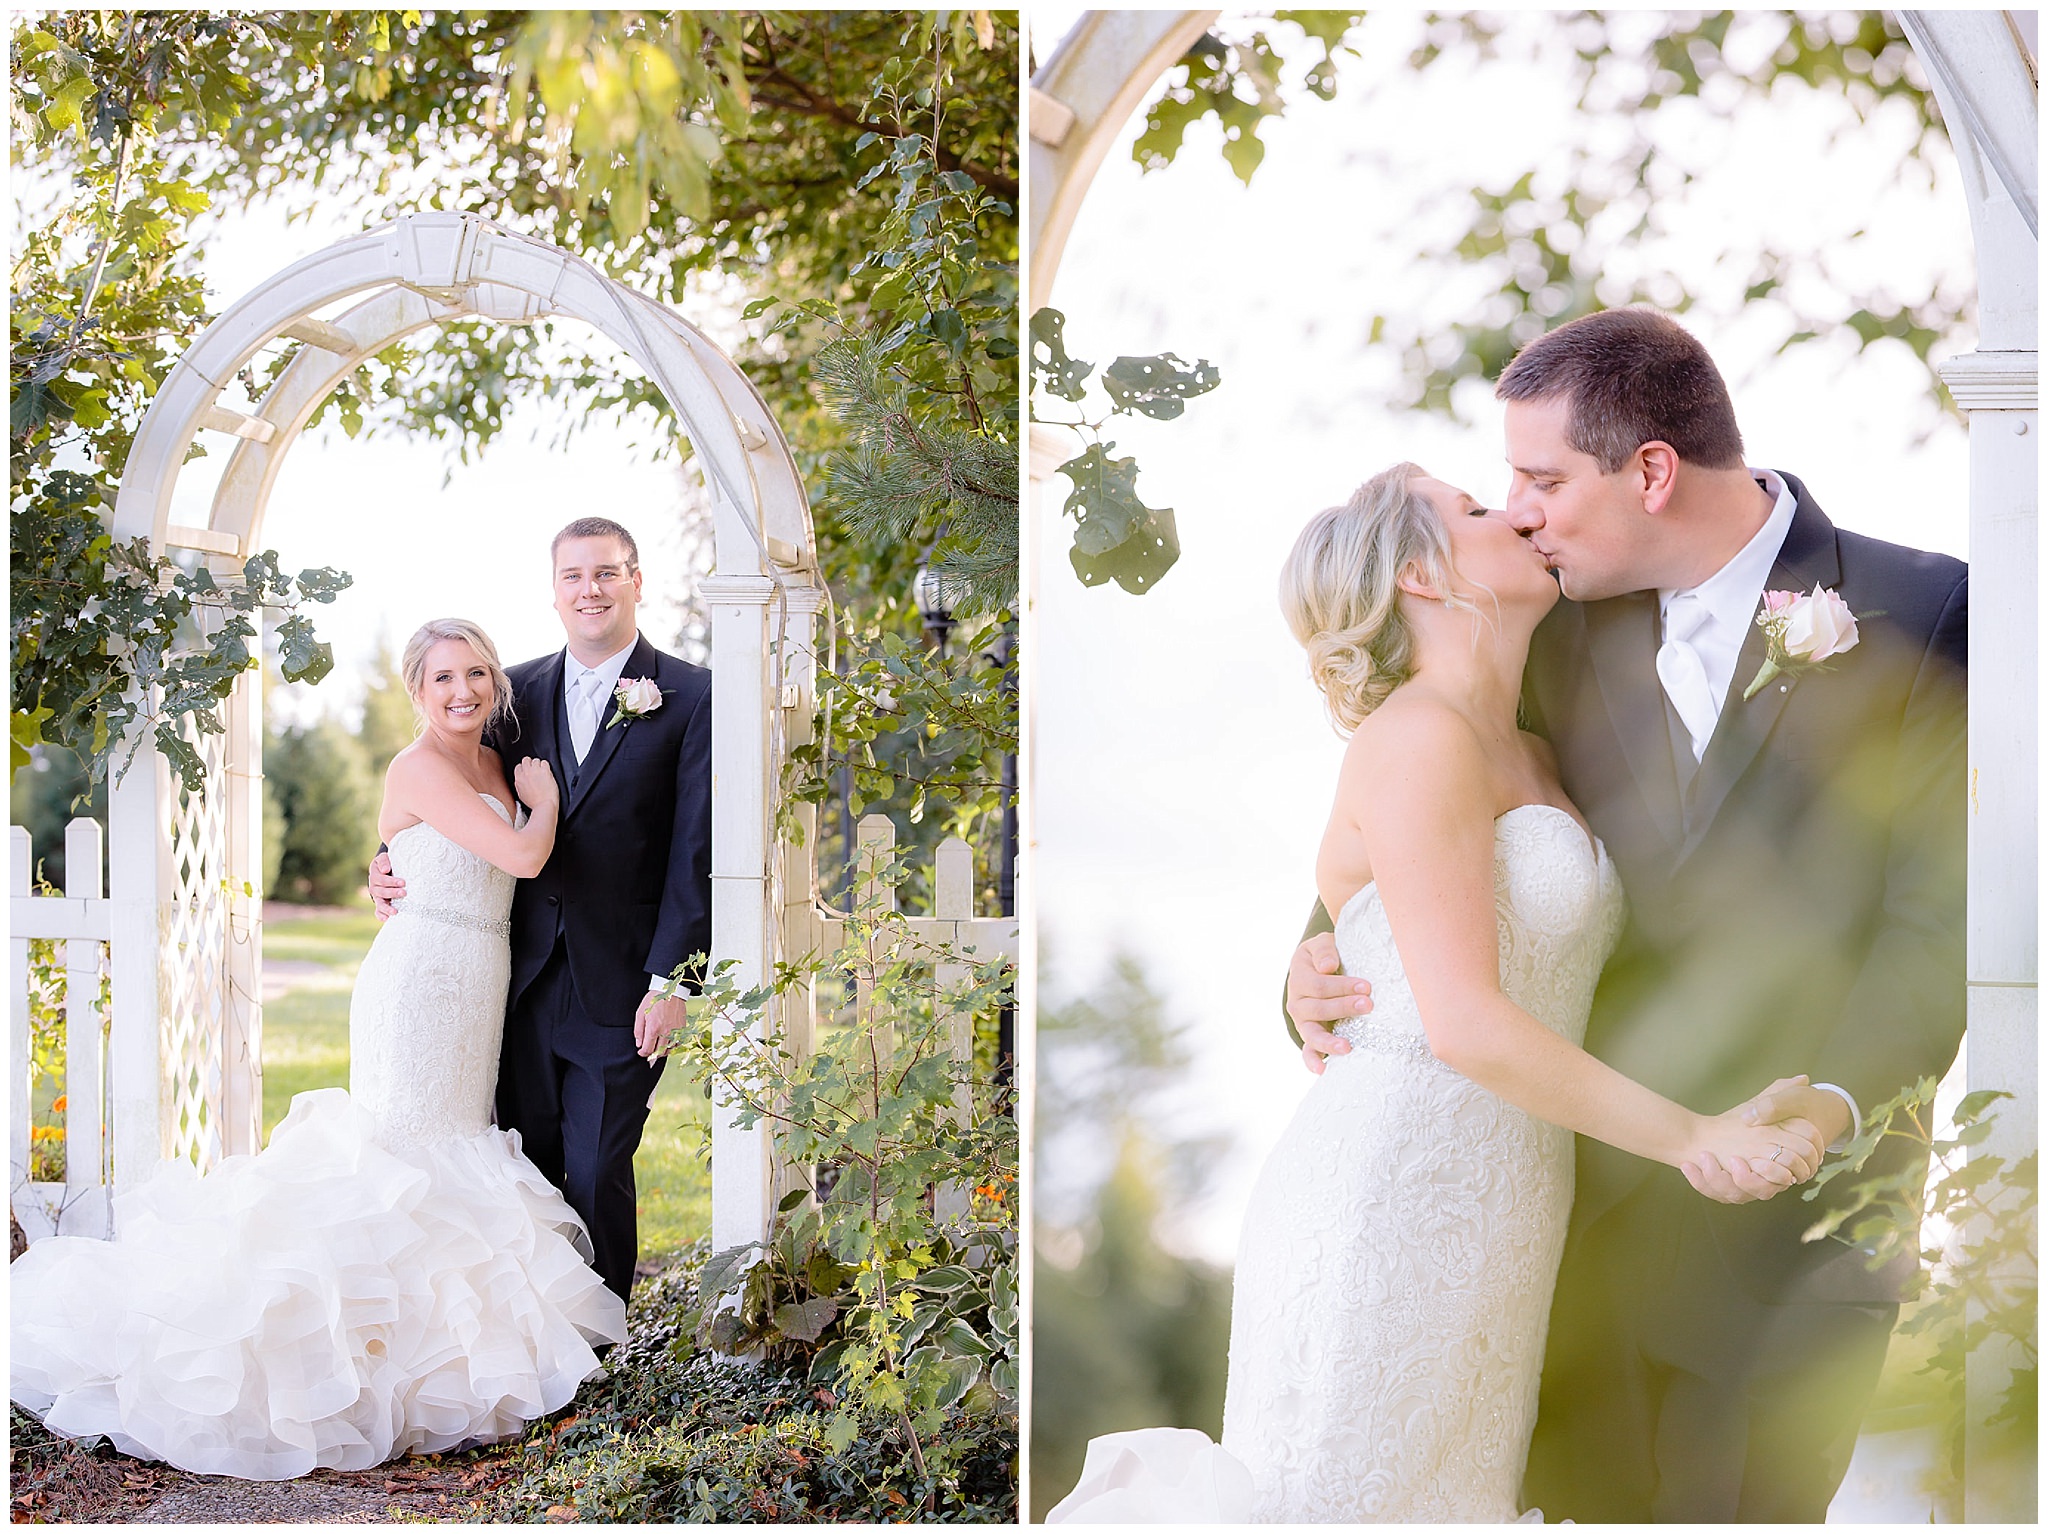 Bride and groom pose under an archway at Greystone Fields